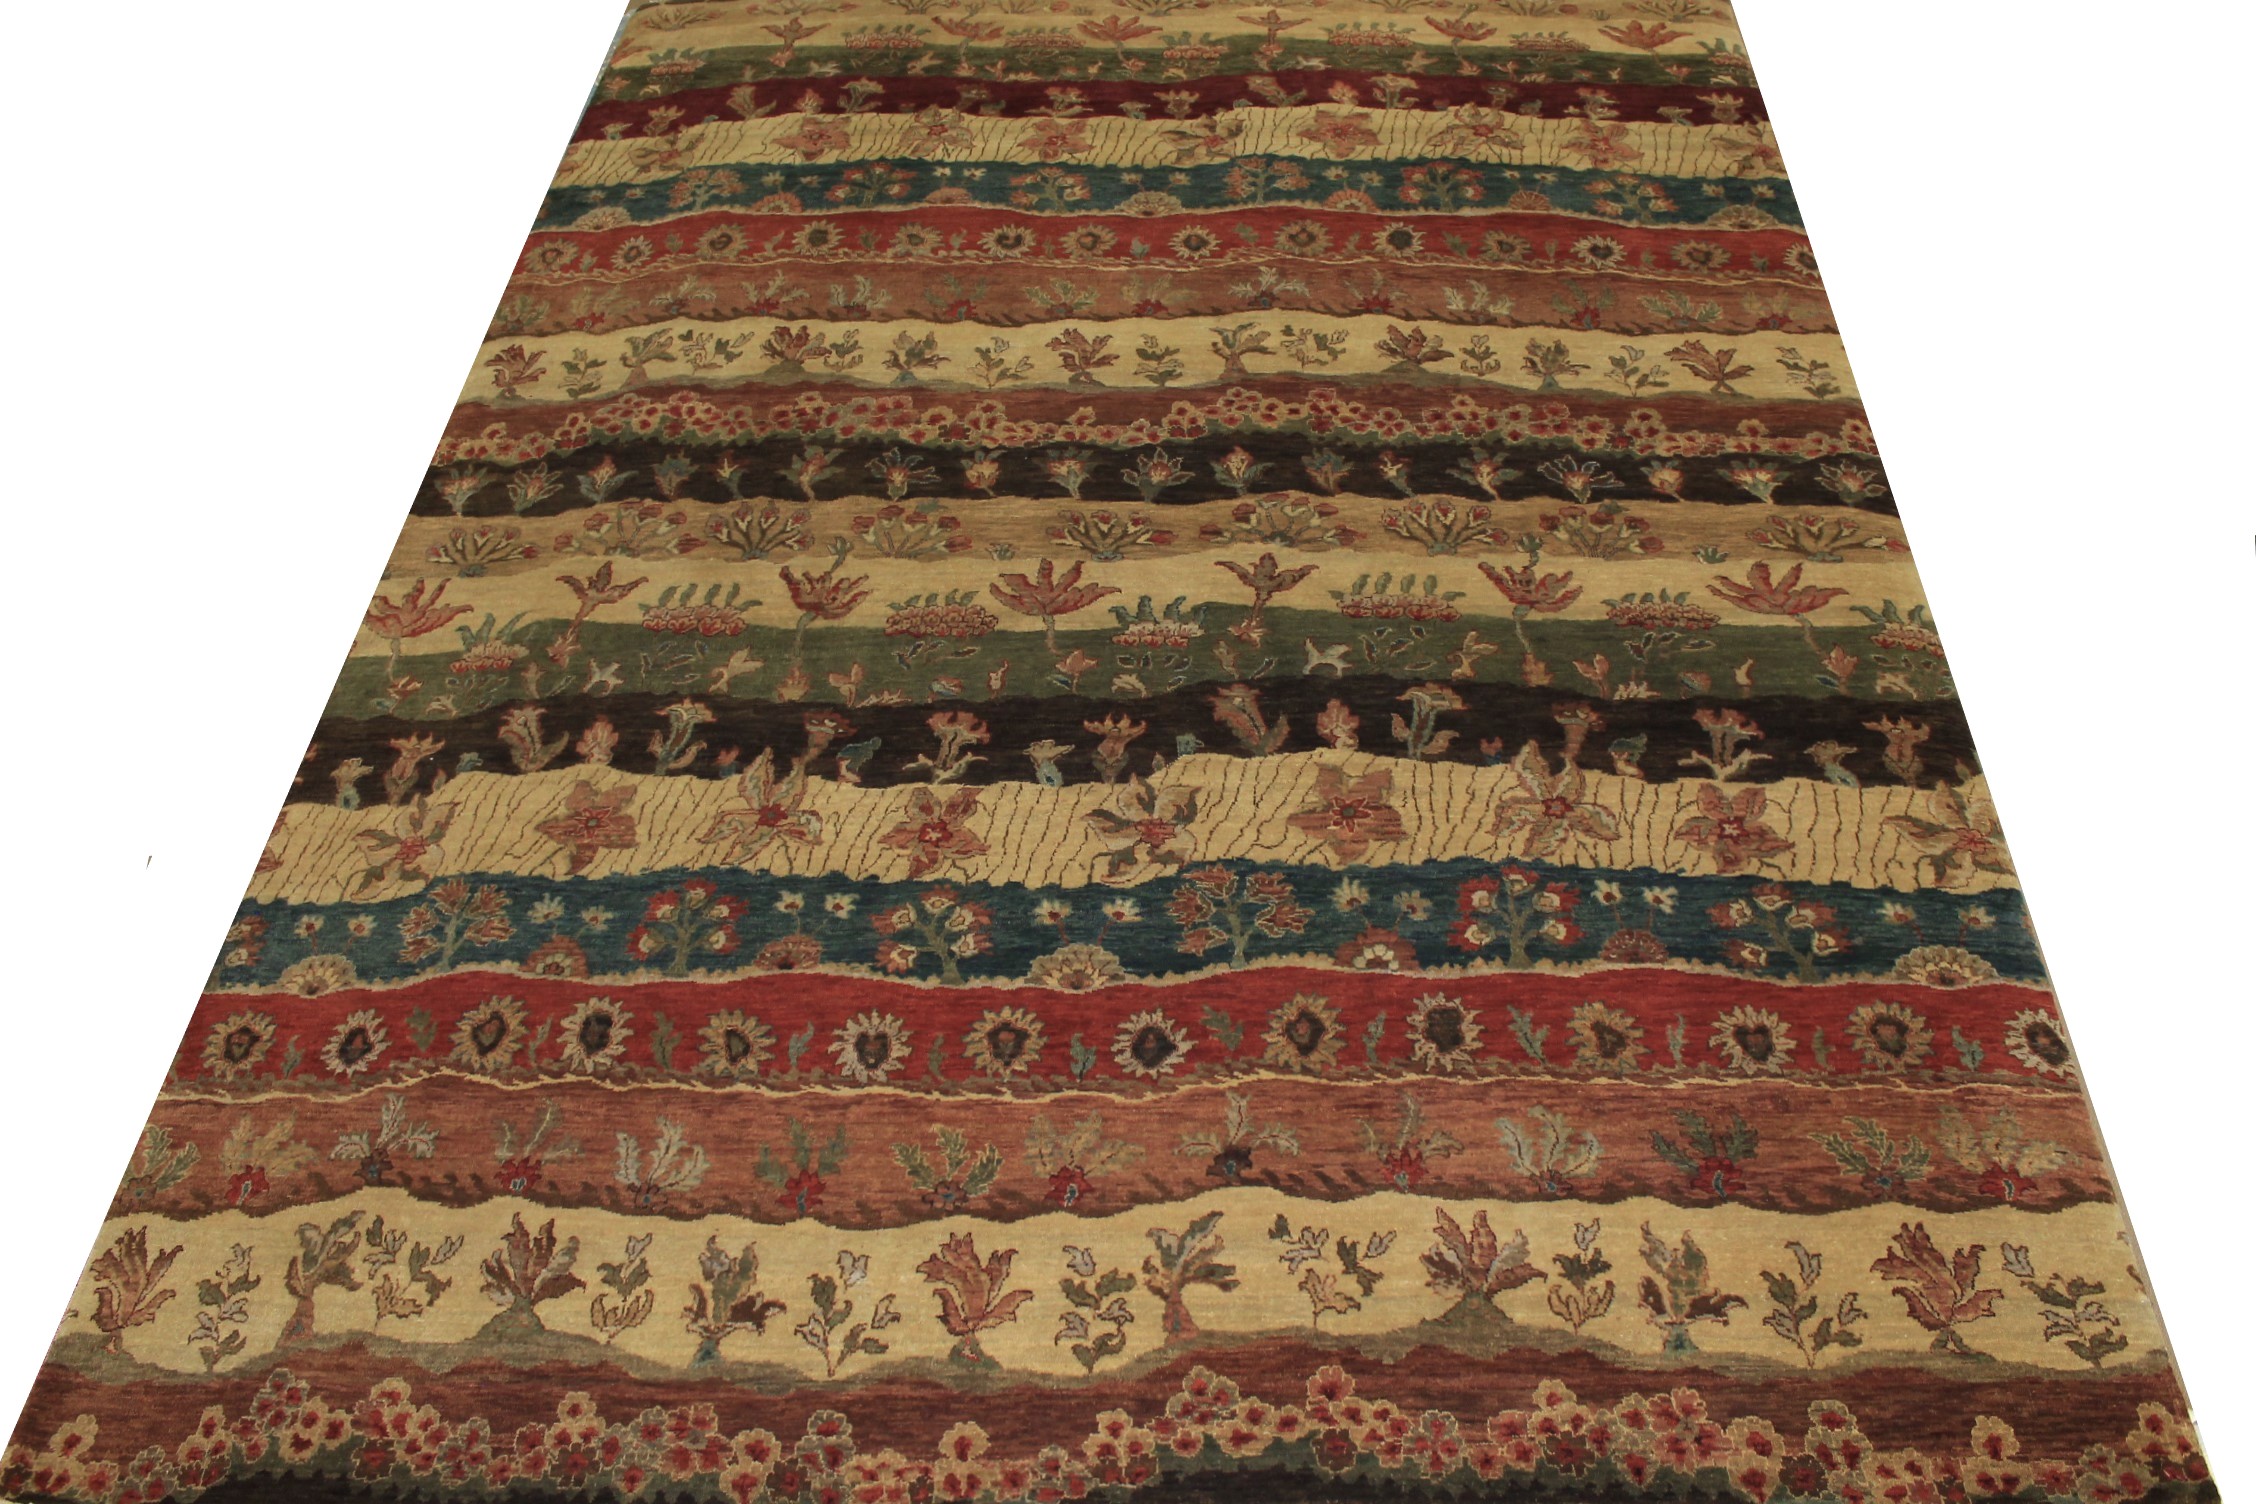 9x12 Antique Revival Hand Knotted Wool Area Rug - MR12903